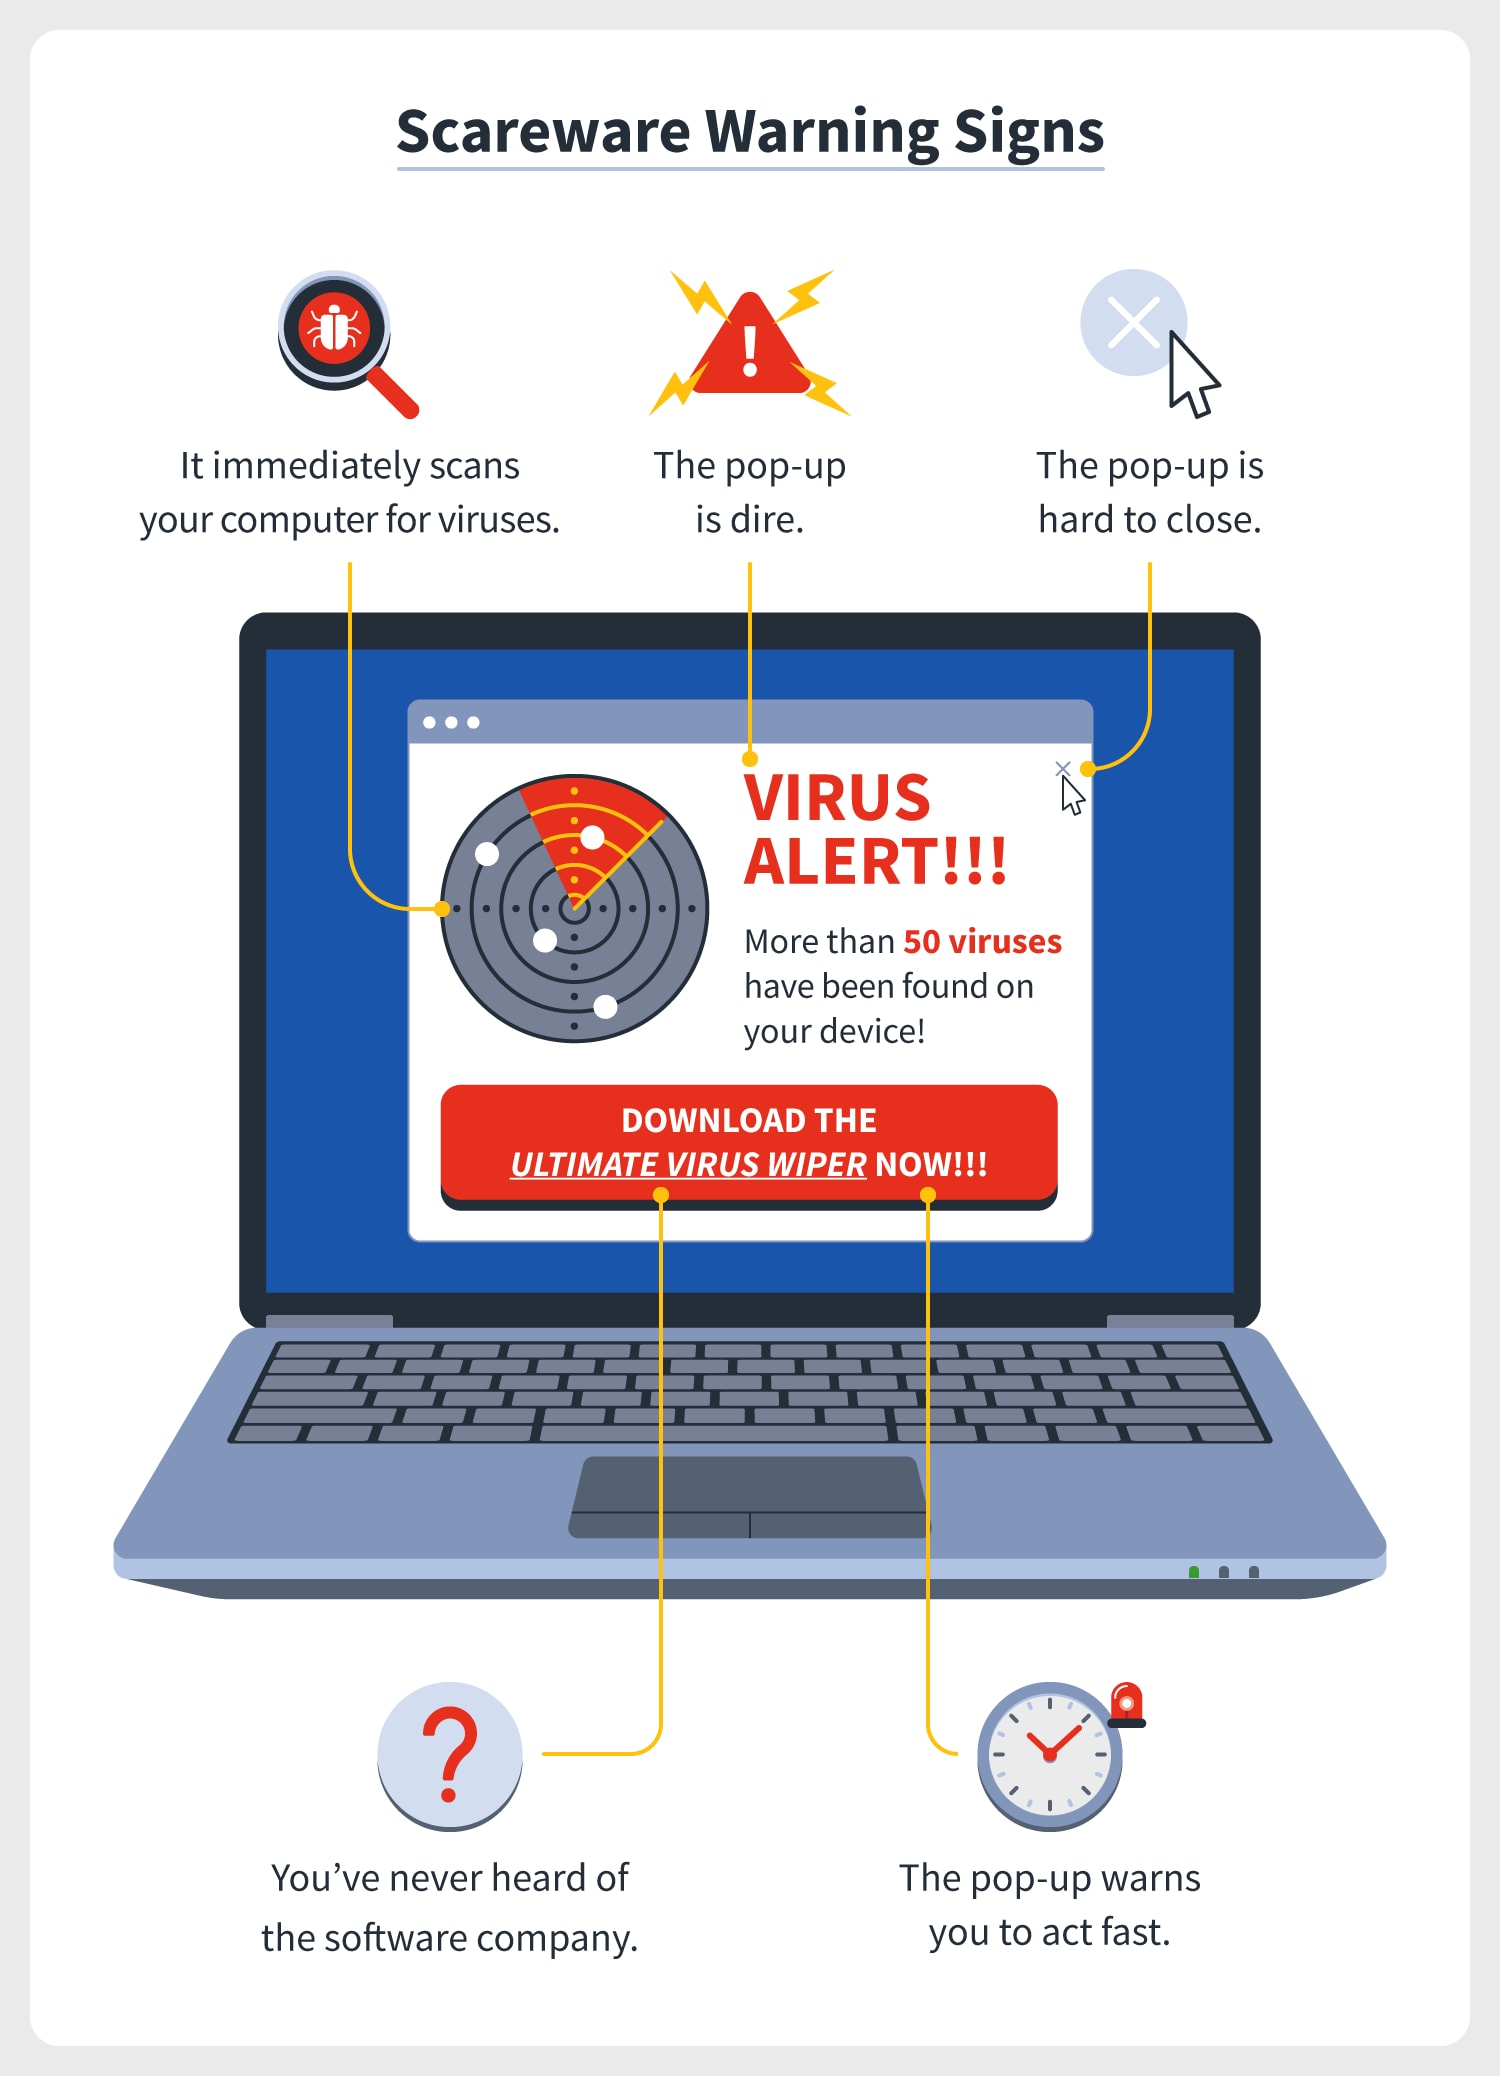 Use a reliable antivirus and anti-malware software to scan your device regularly.
Avoid clicking on suspicious links, emails, or pop-ups.